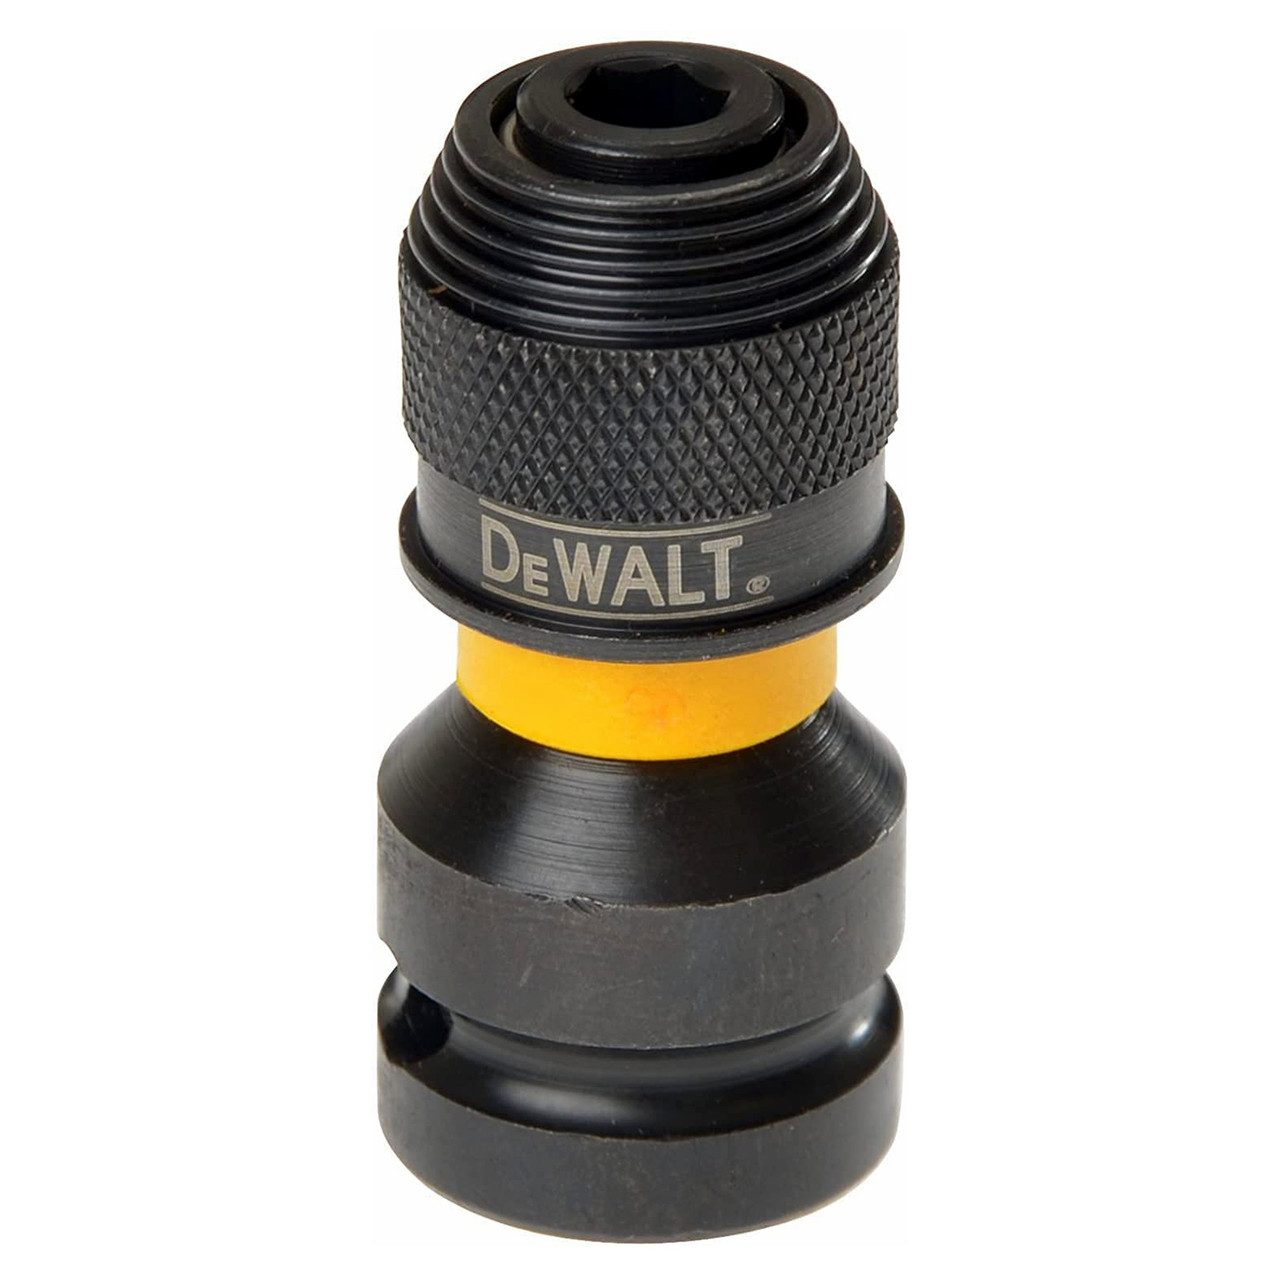 Photos - Power Tool Accessory DeWALT DT7508QZ 1/4" Hex to 1/2" Square Impact Wrench Adapter 